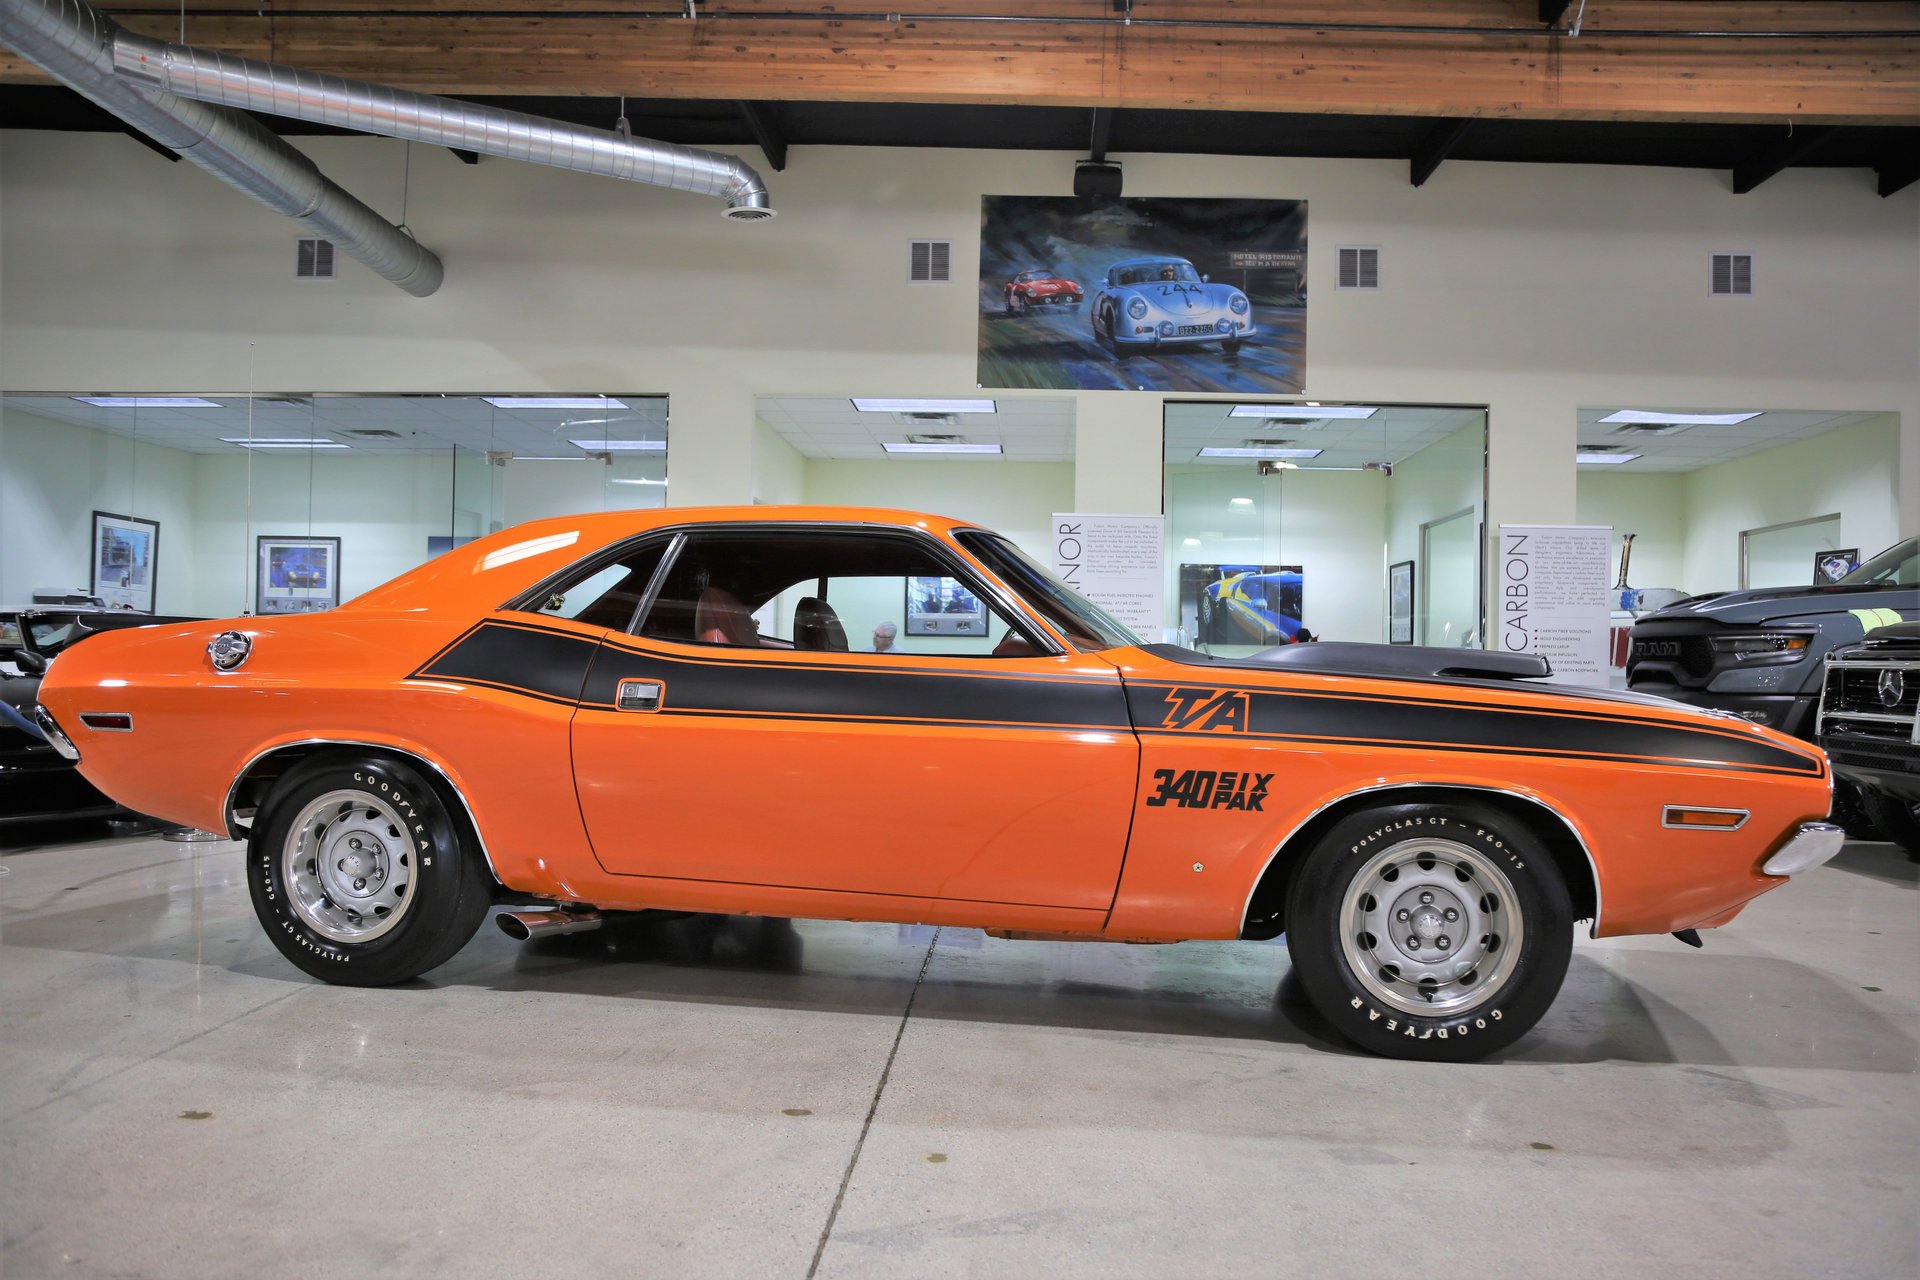 1970 Dodge Challenger T/A 340 Six Pak | American Muscle CarZ